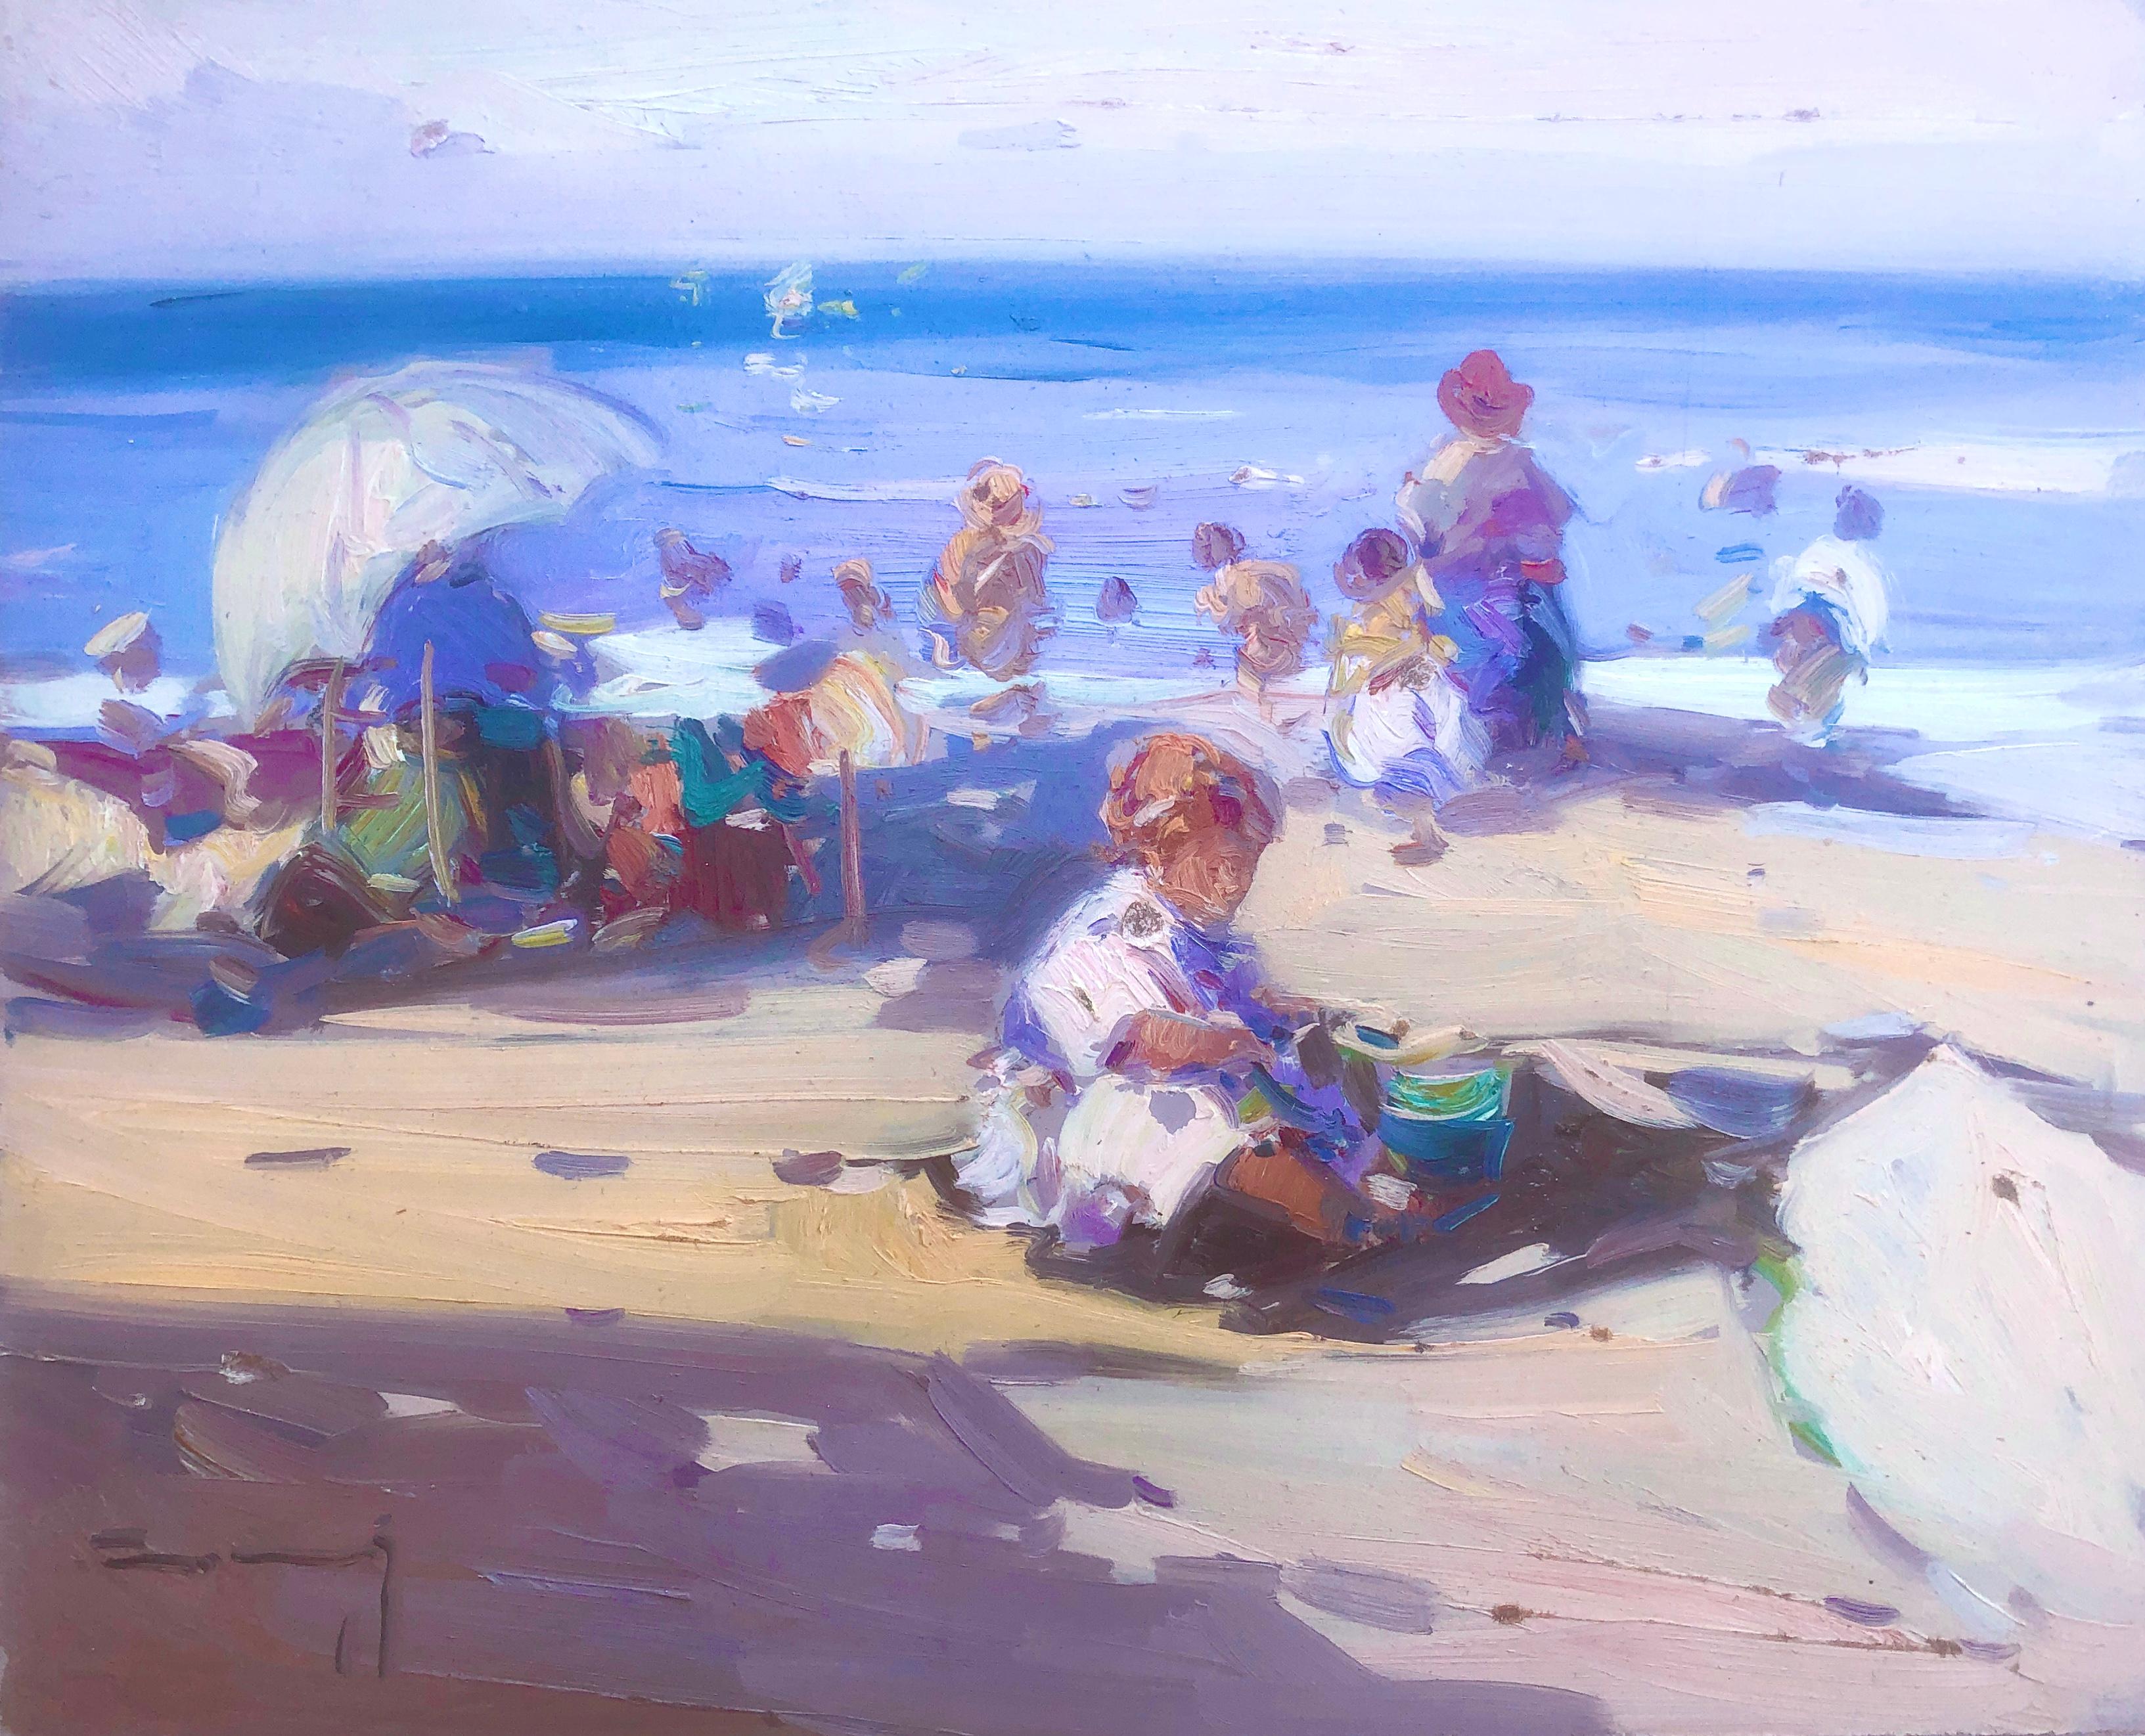 Spanish people on the beach Spain oil on board painting